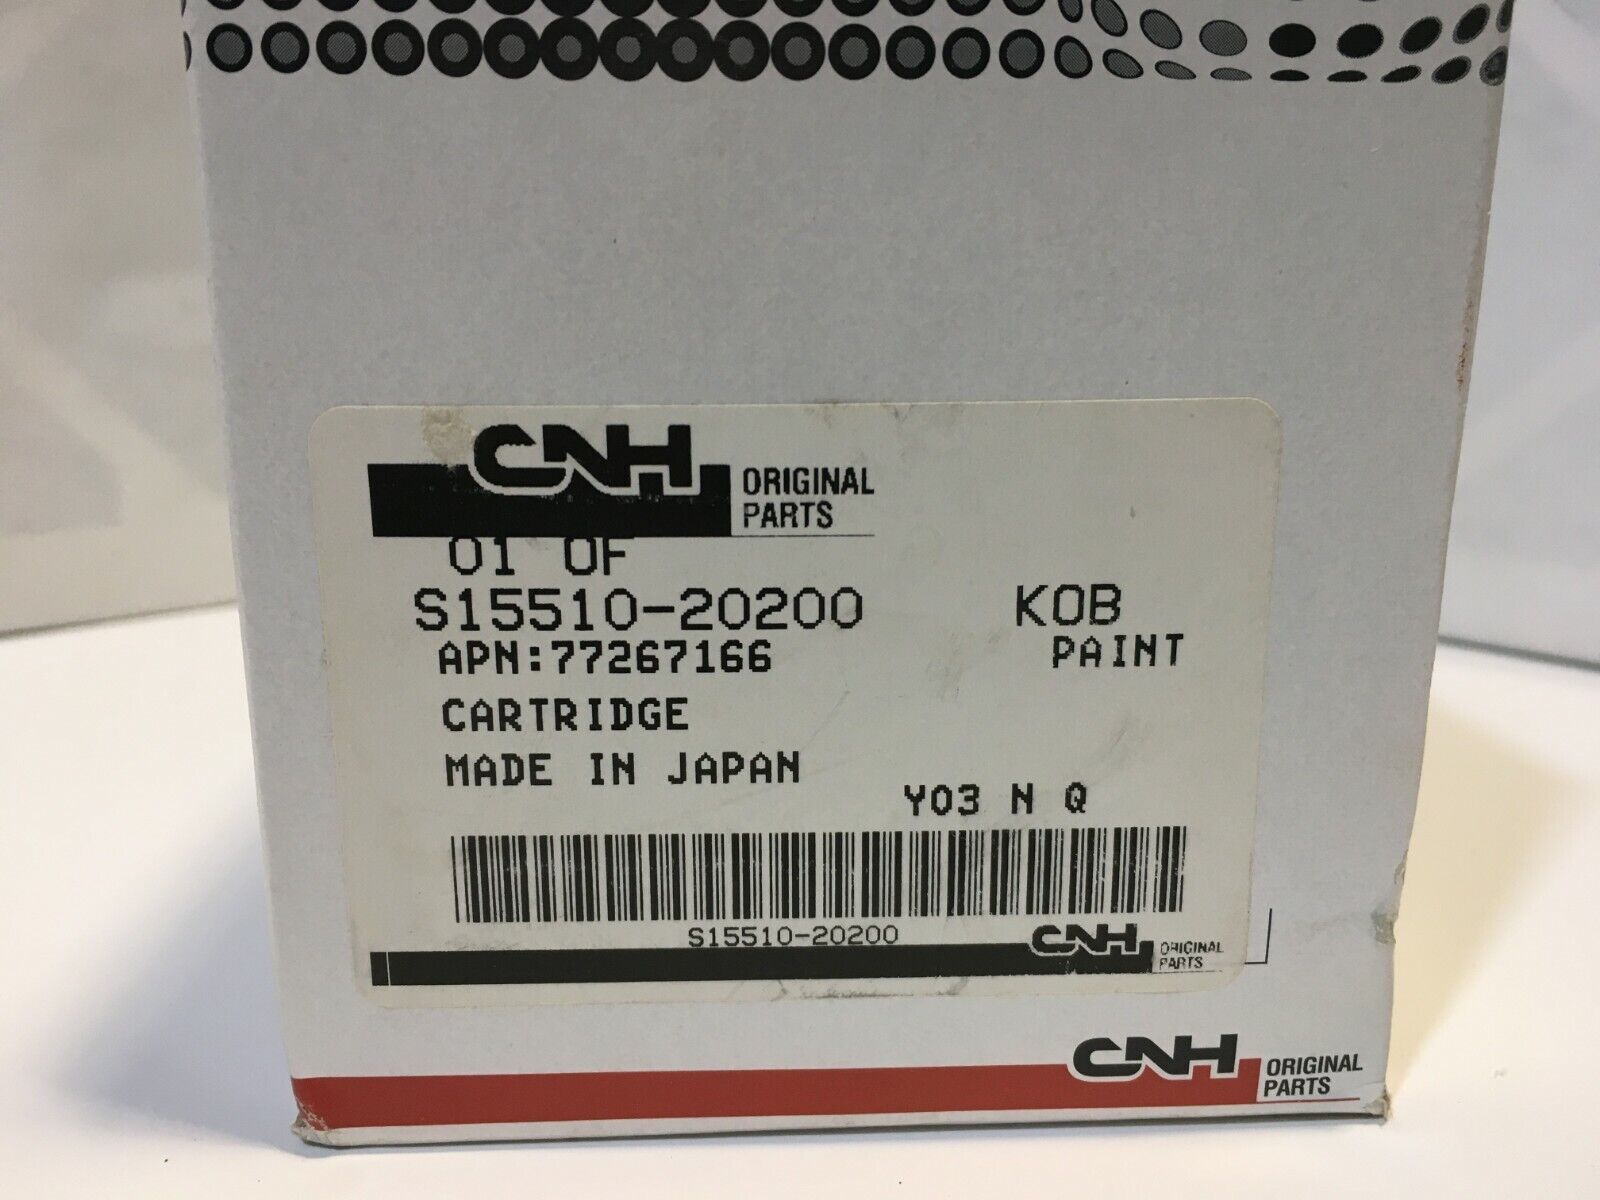 CNH - Hydraulic Oil Filter - #S15510-20200 / #77267166 - 3 Filters in lot CNH S15510-20200